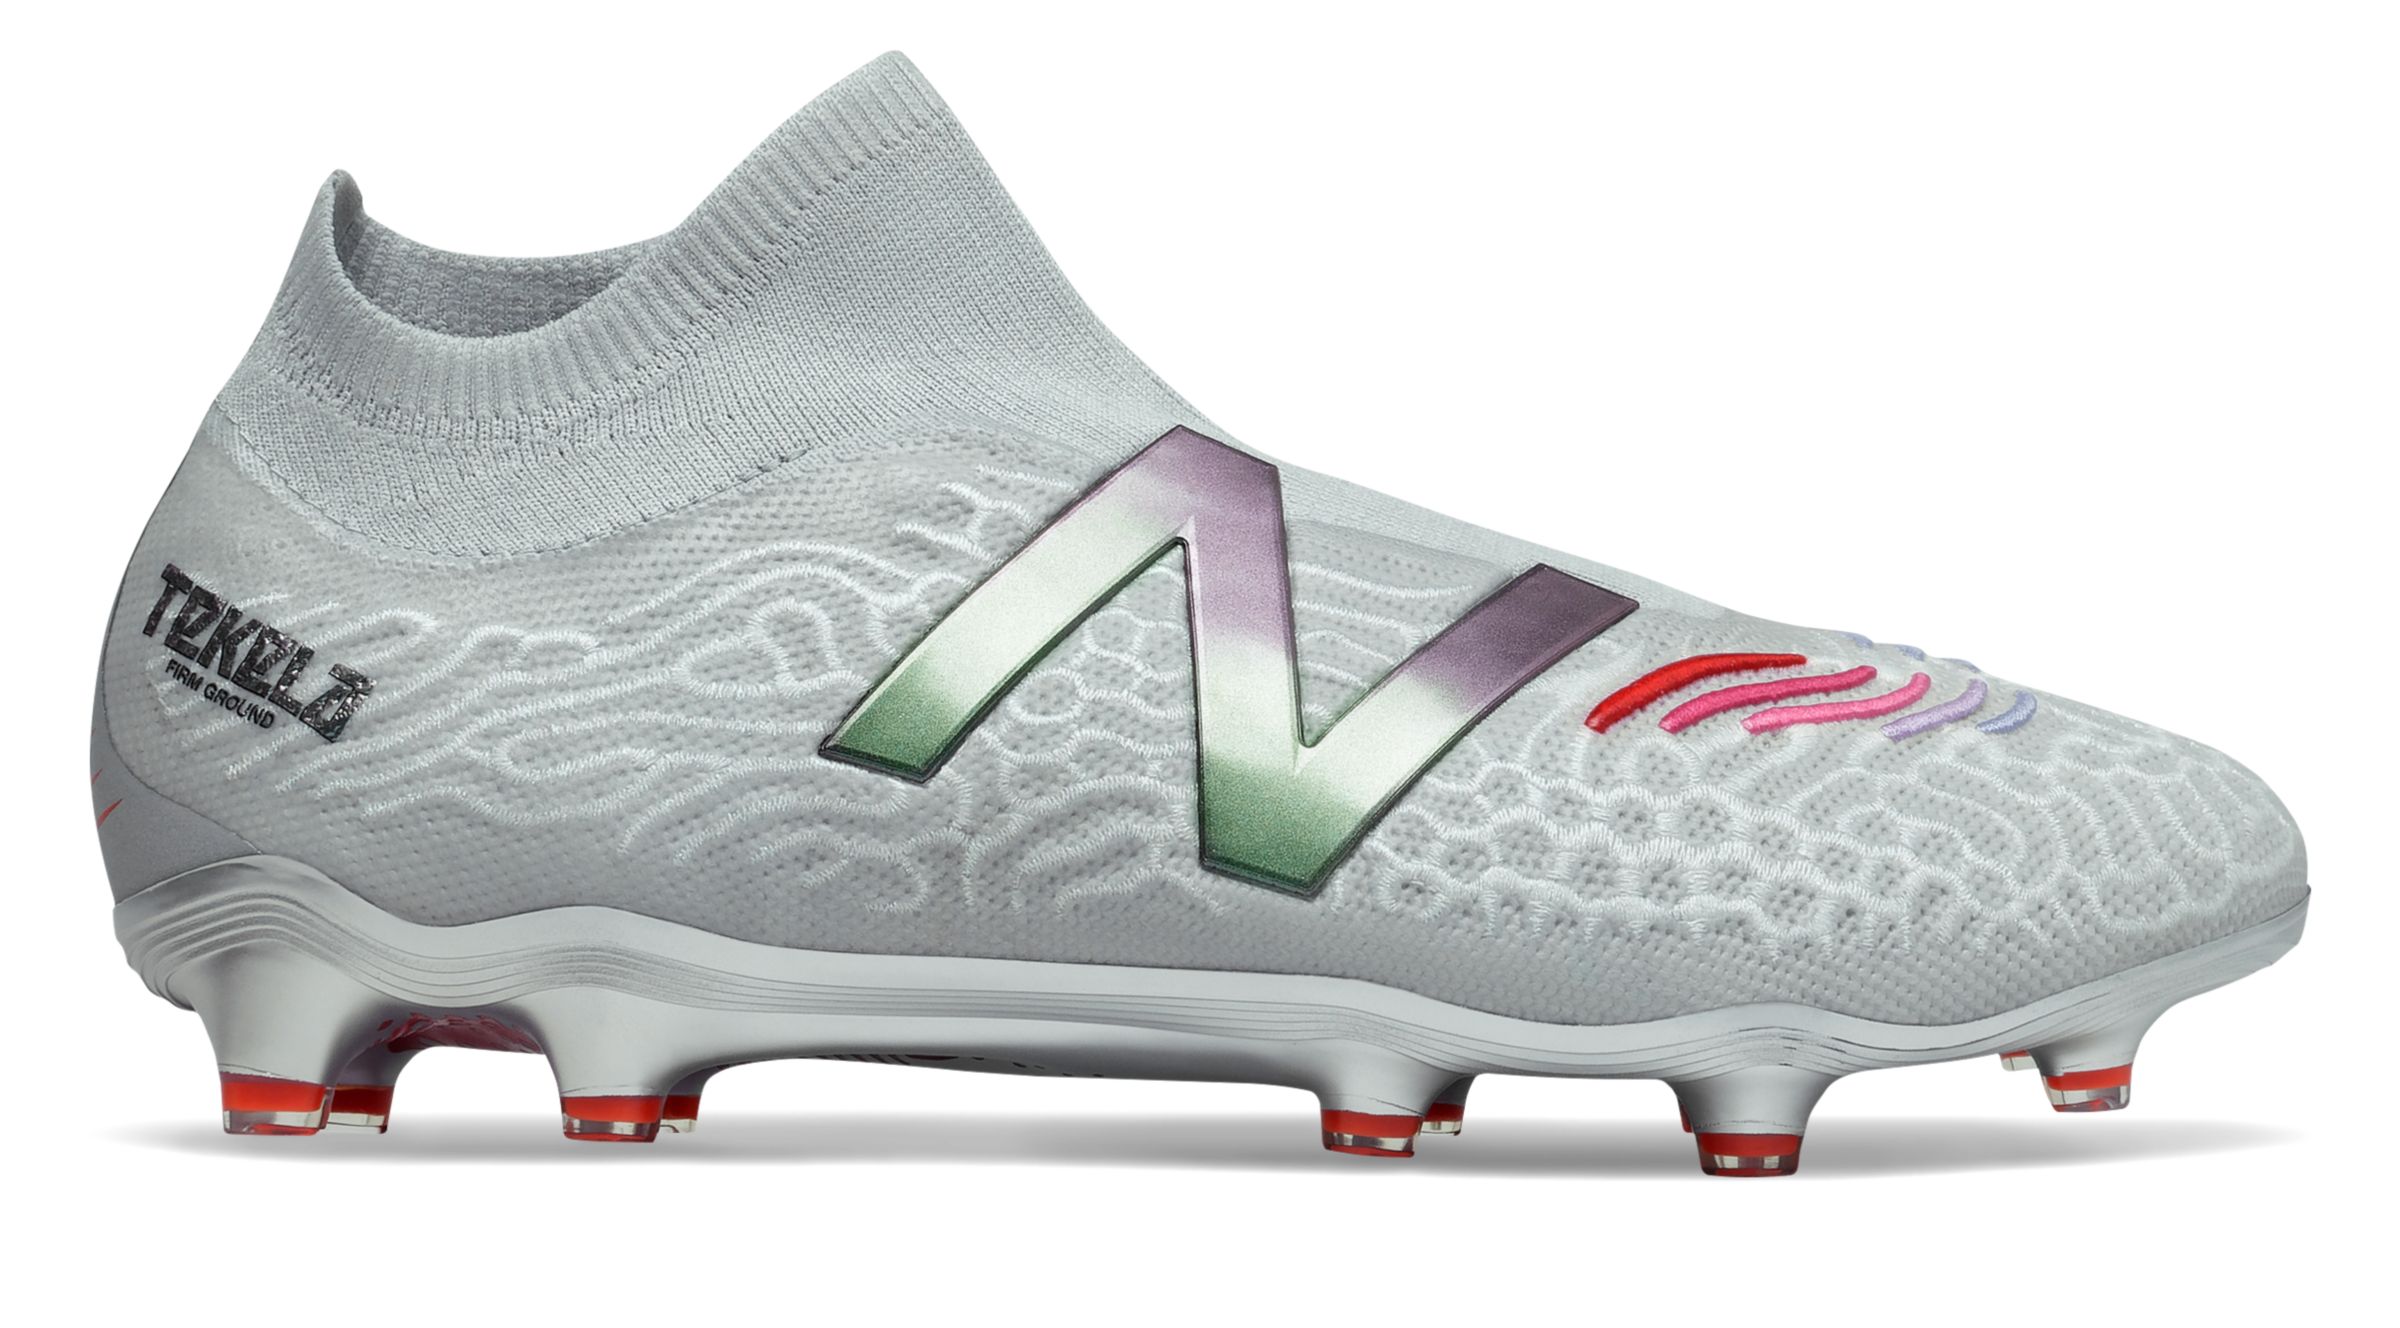 new balance soccer shoes